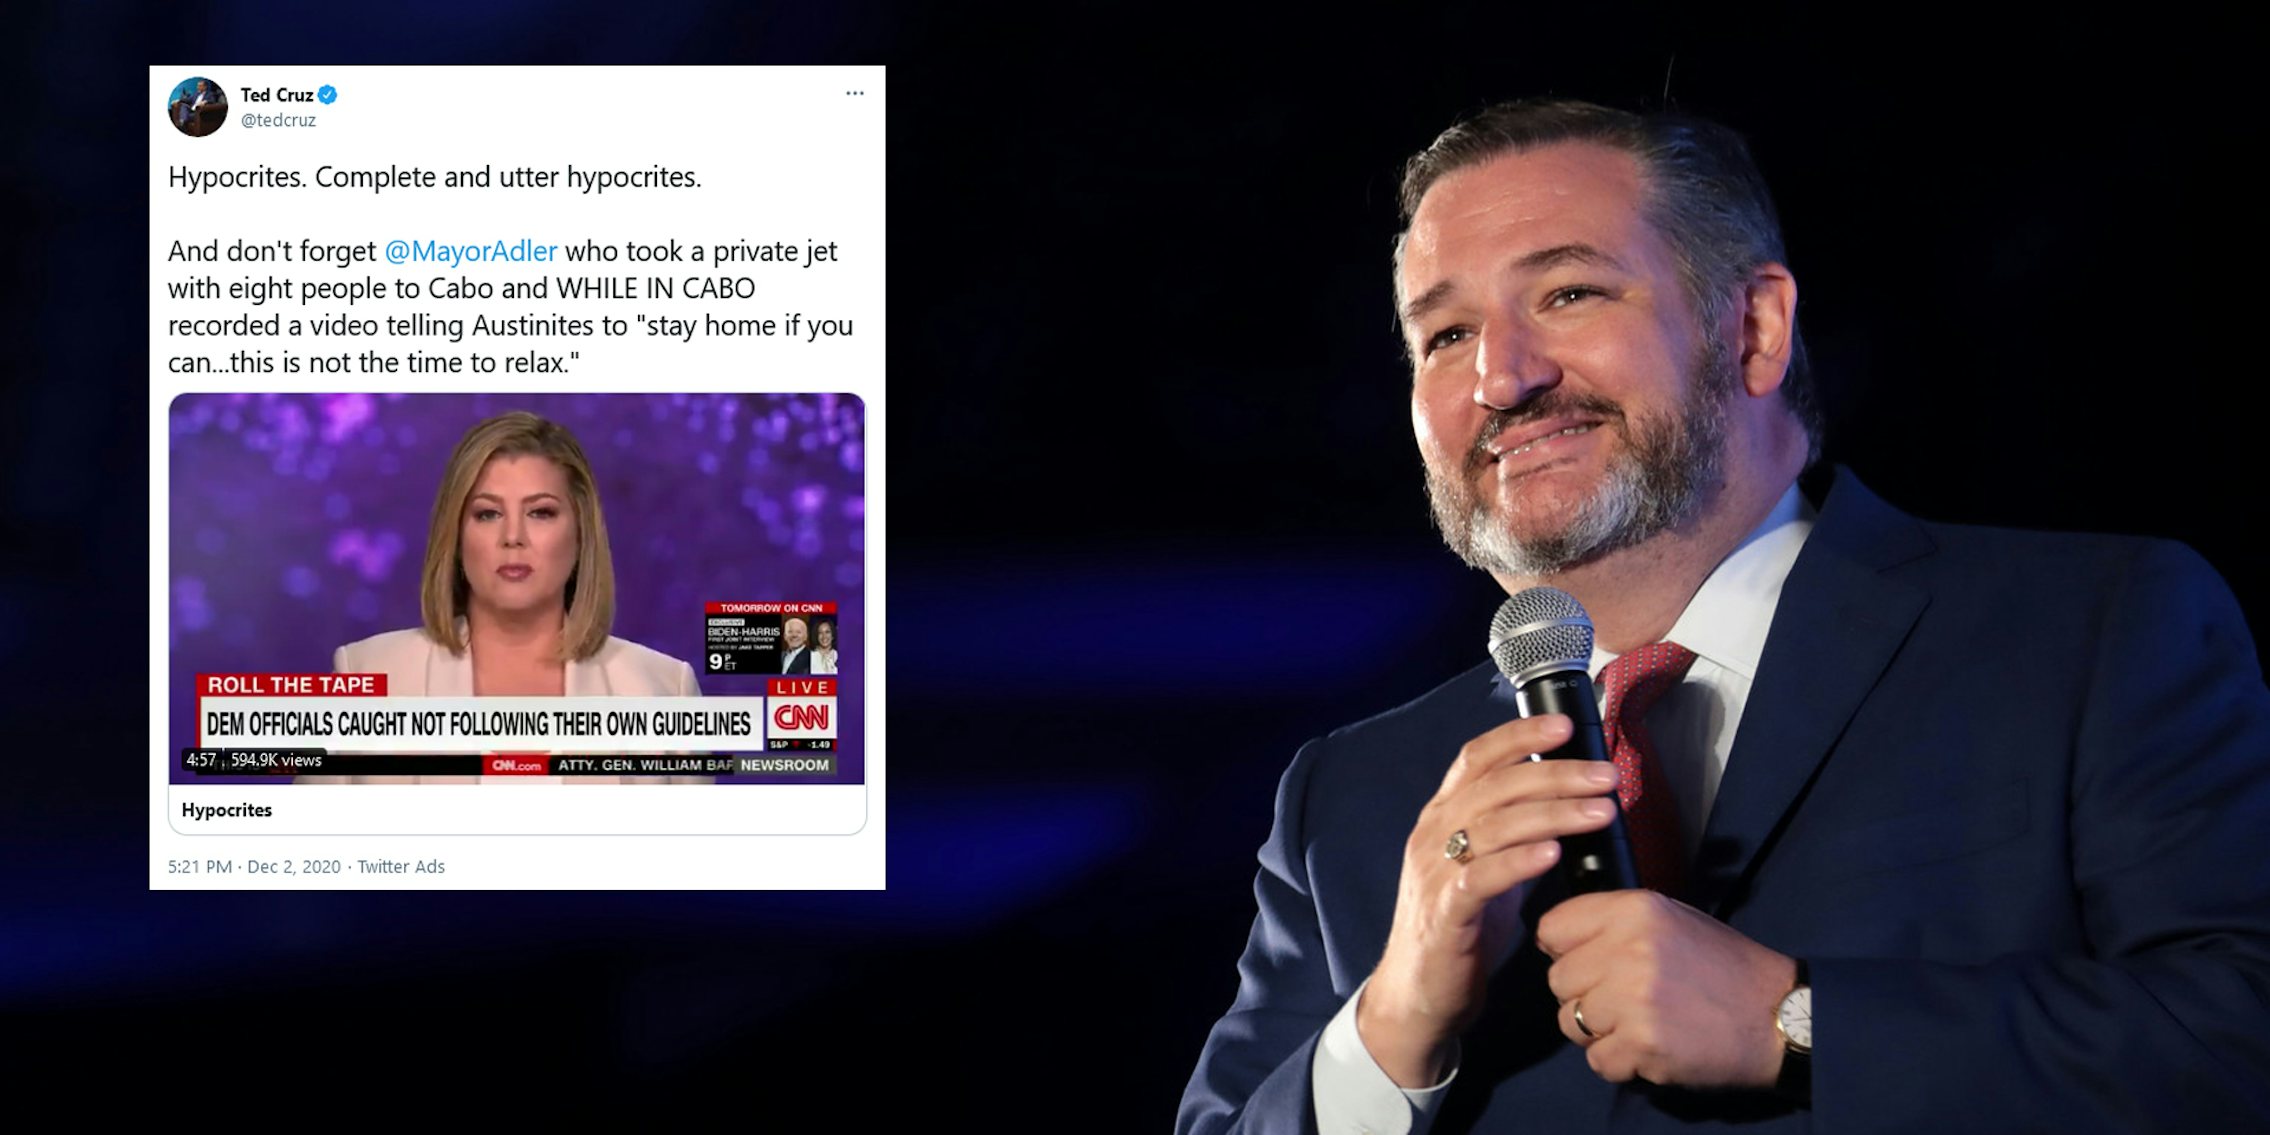 Ted Cruz next to an old tweet of his criticizing Austin's mayor for leaving during COVID. The tweet has resurfaced as he fled Texas for Cancun during a winter storm crisis, which also sparked memes.